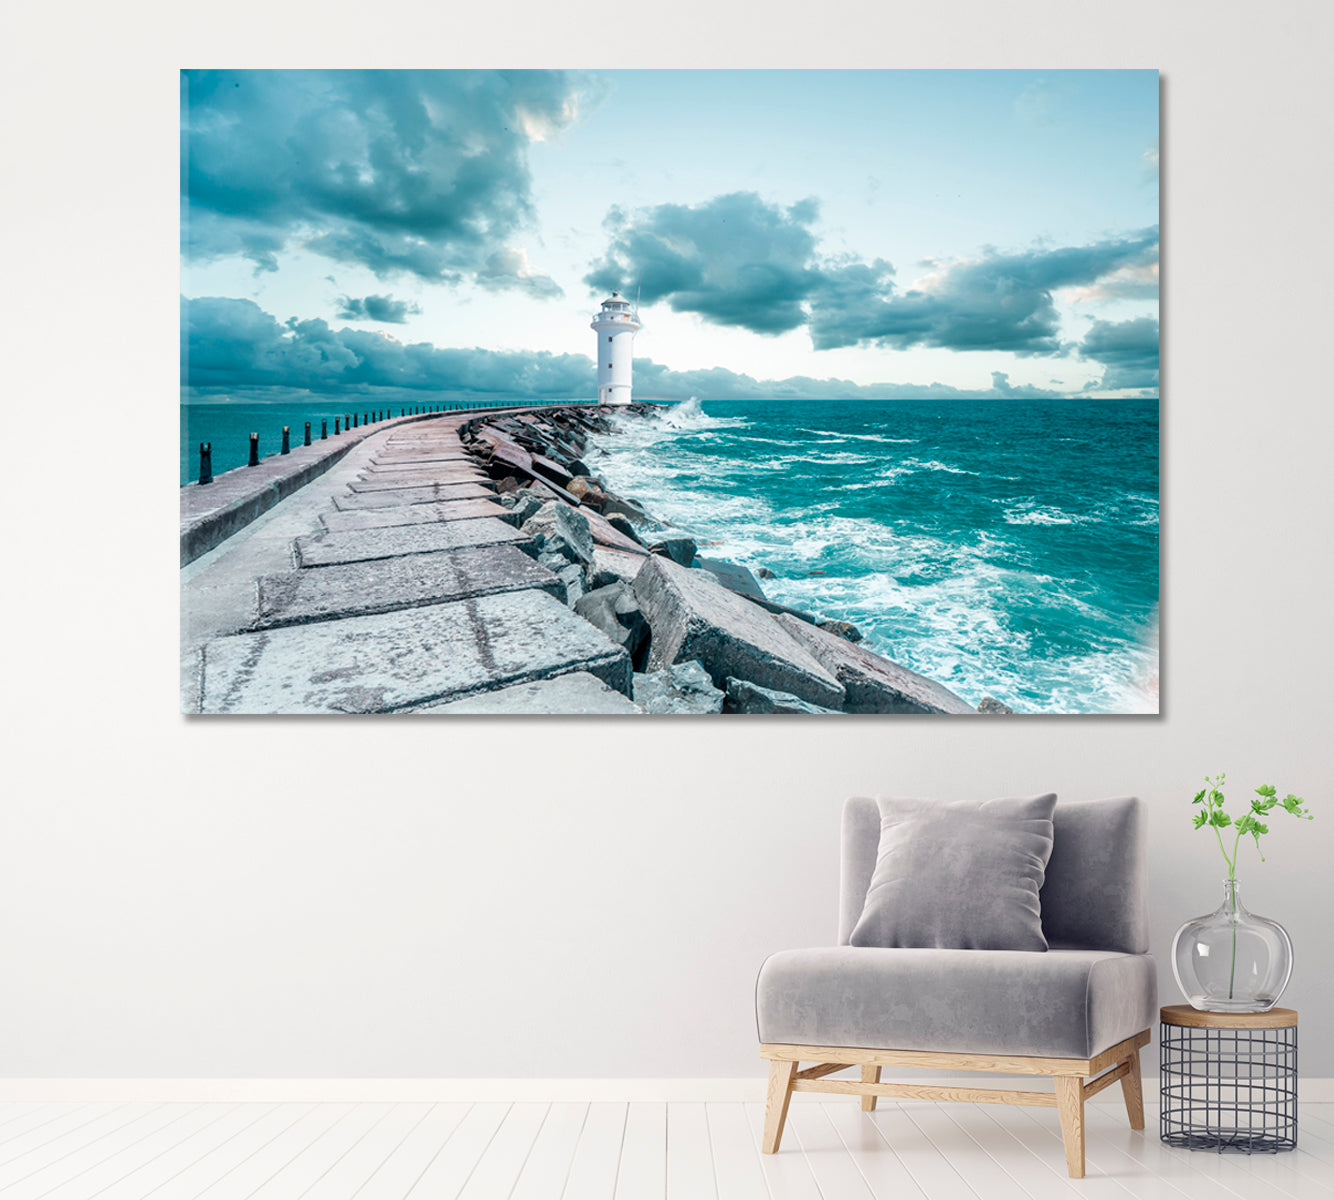 Stormy Waves over Lighthouse Canvas Print ArtLexy 1 Panel 24"x16" inches 